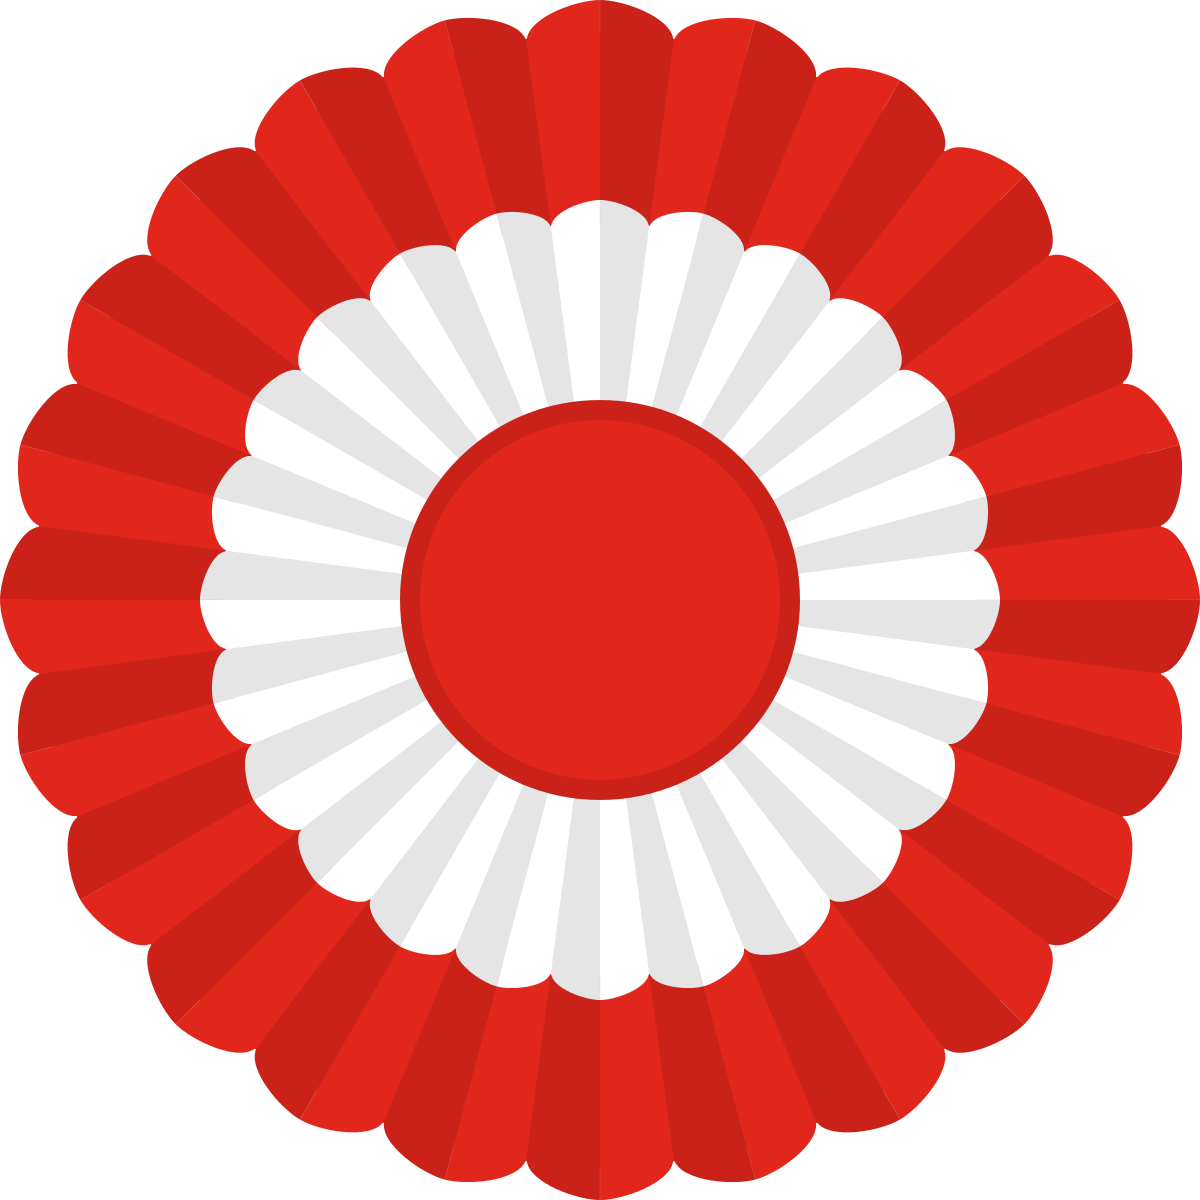 A Red And White Circle With White Center